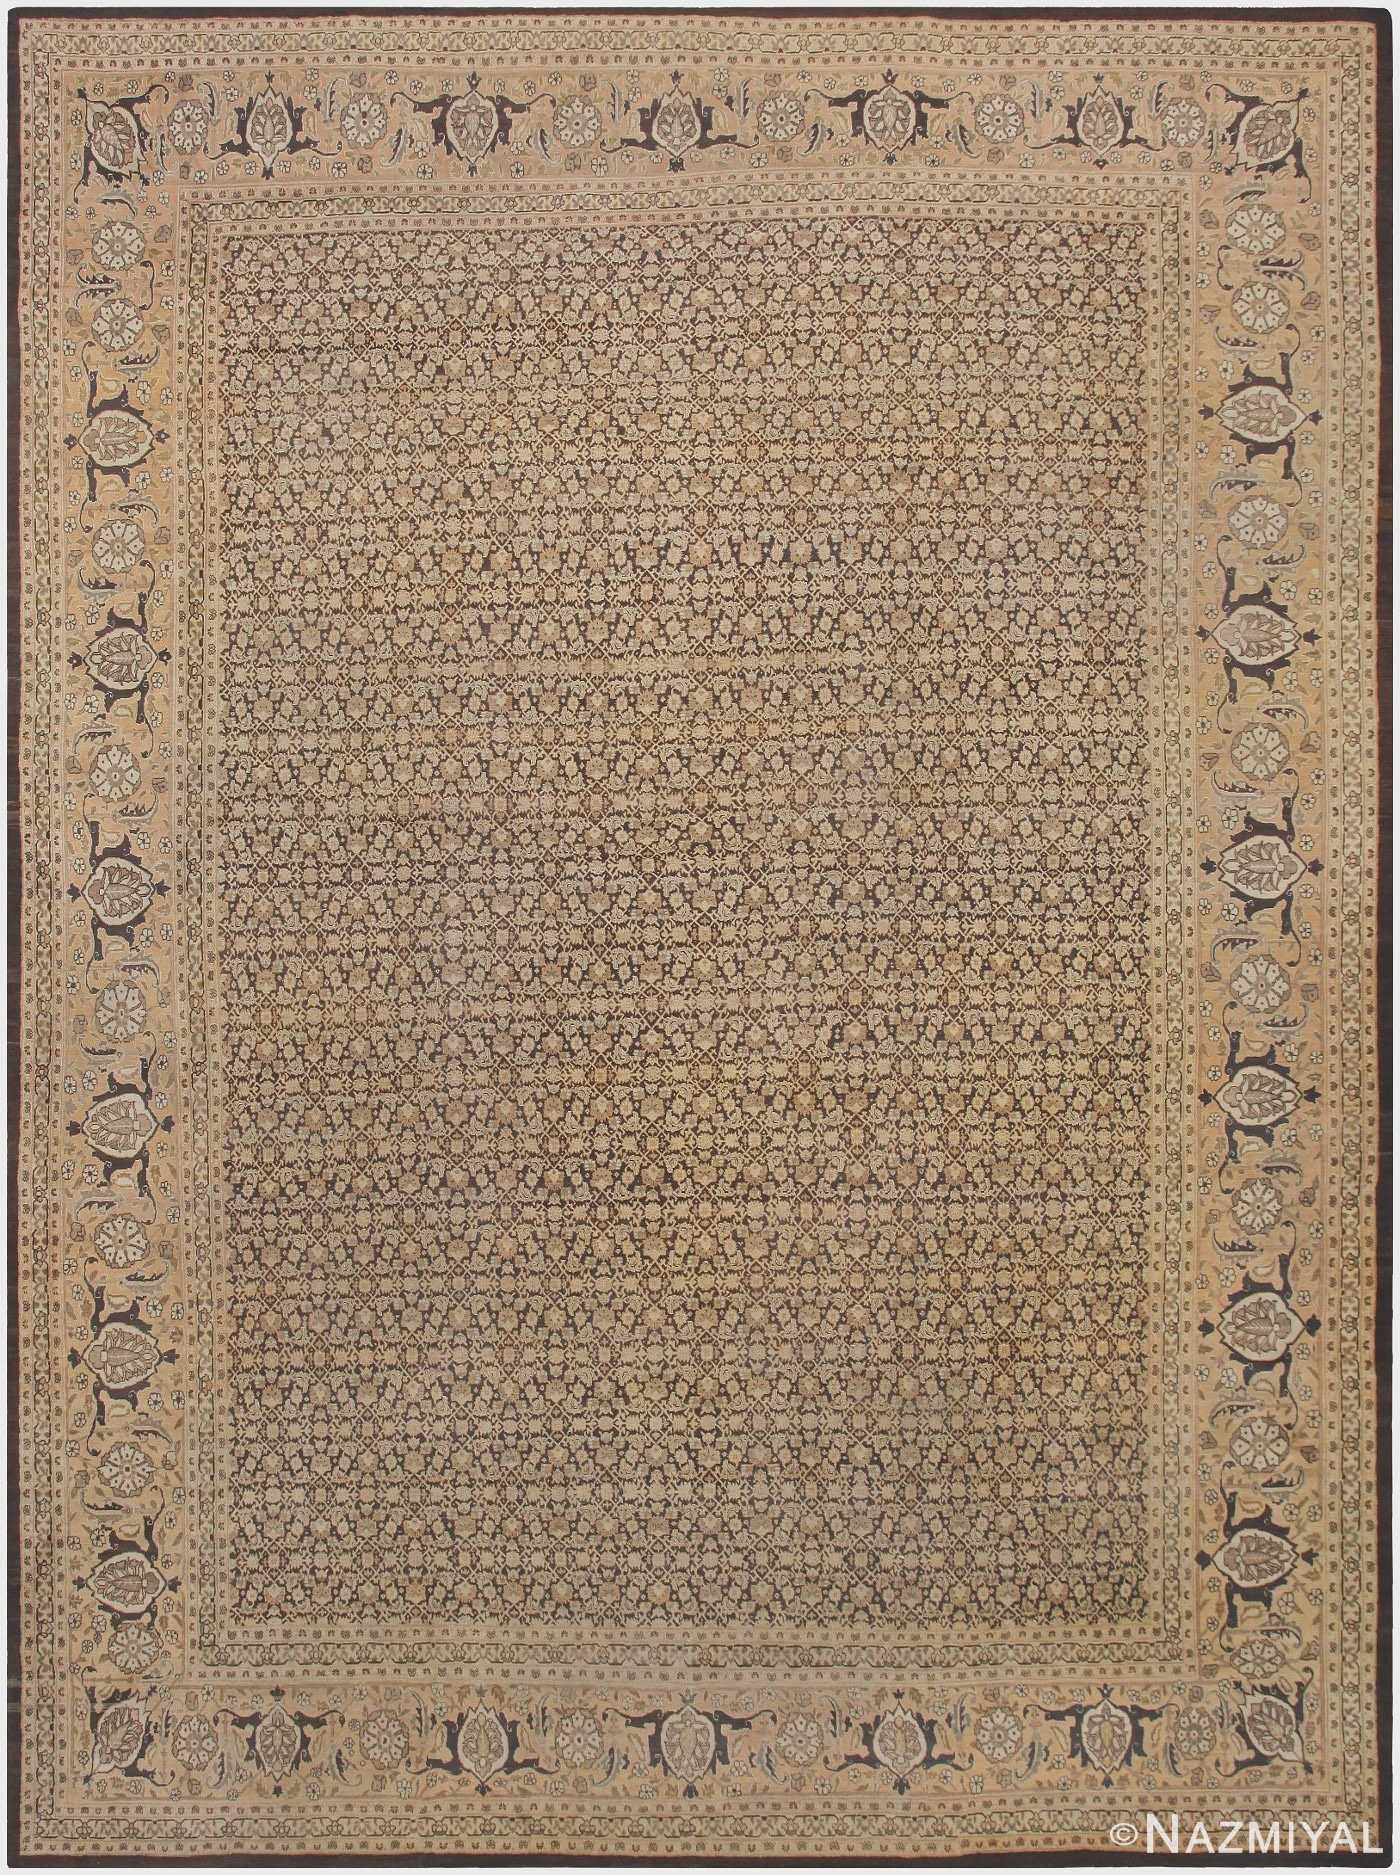 Large Antique Brown Background Persian Tabriz Area Rug 46808 by Nazmiyal Antique Rugs